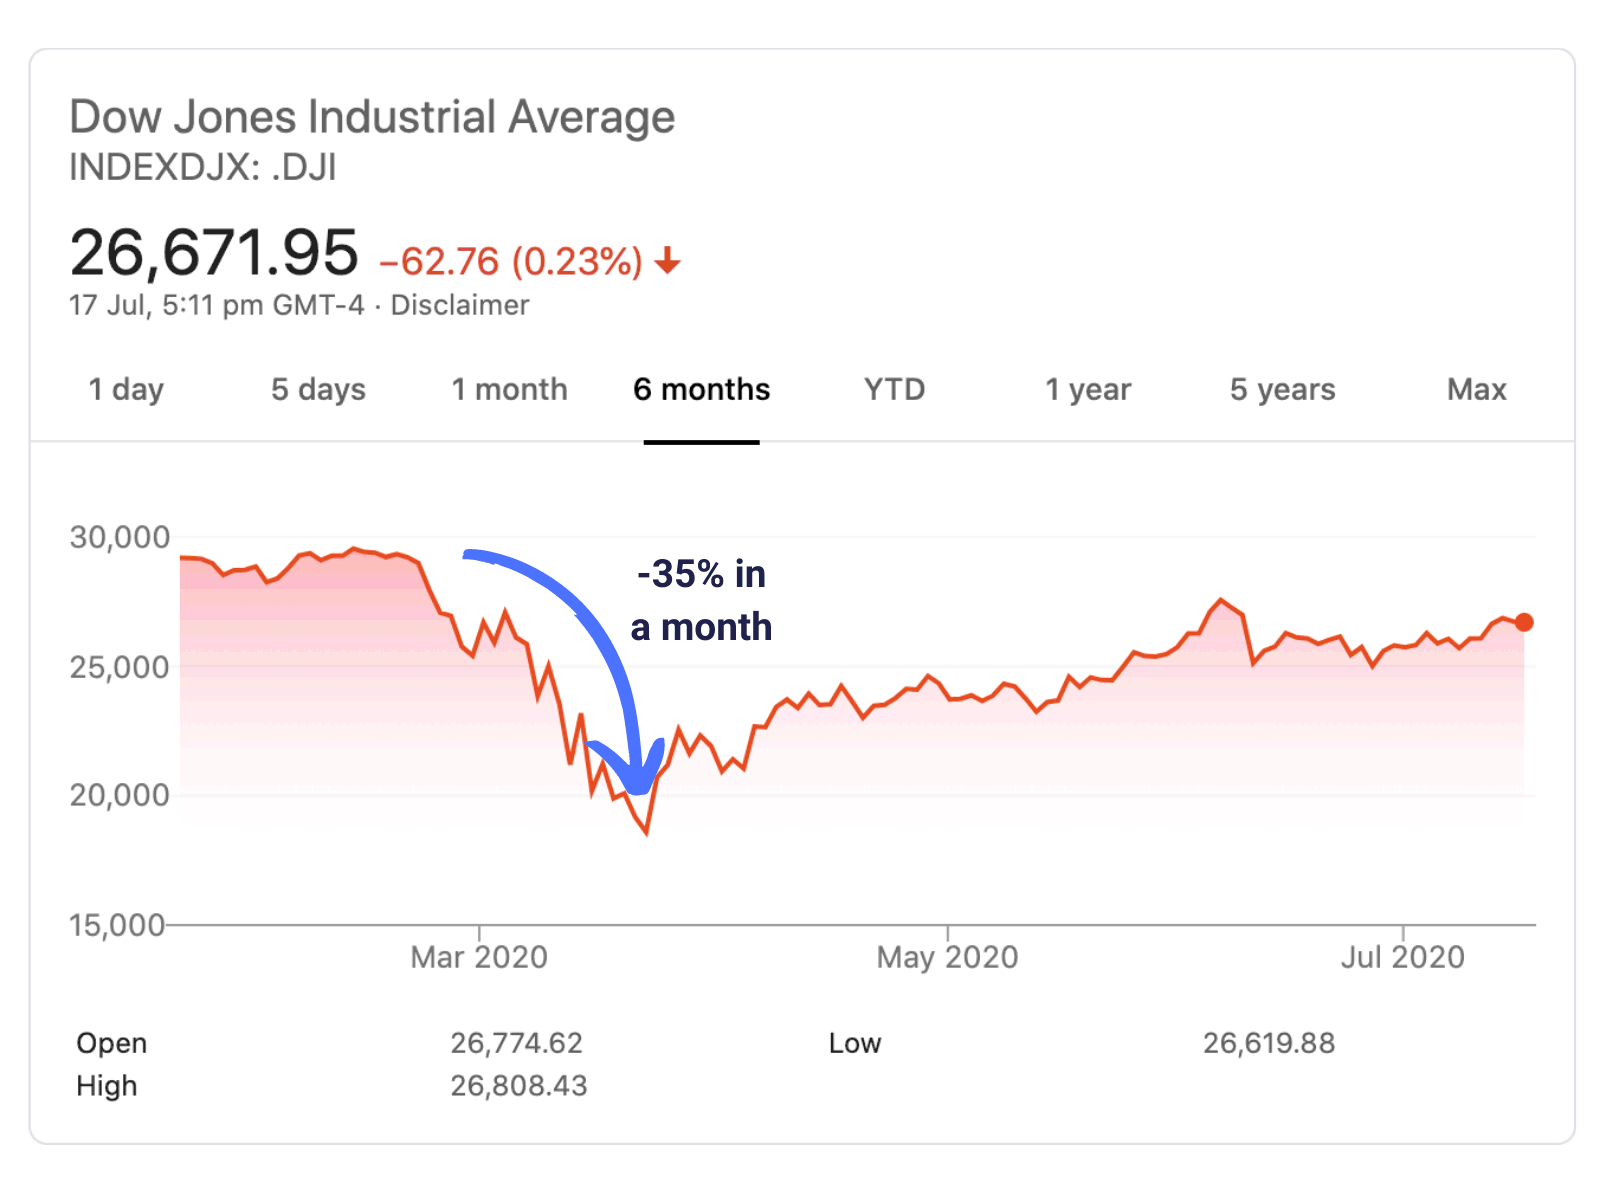 Rise in Dow Jones Index after a massive drop in March 2020.